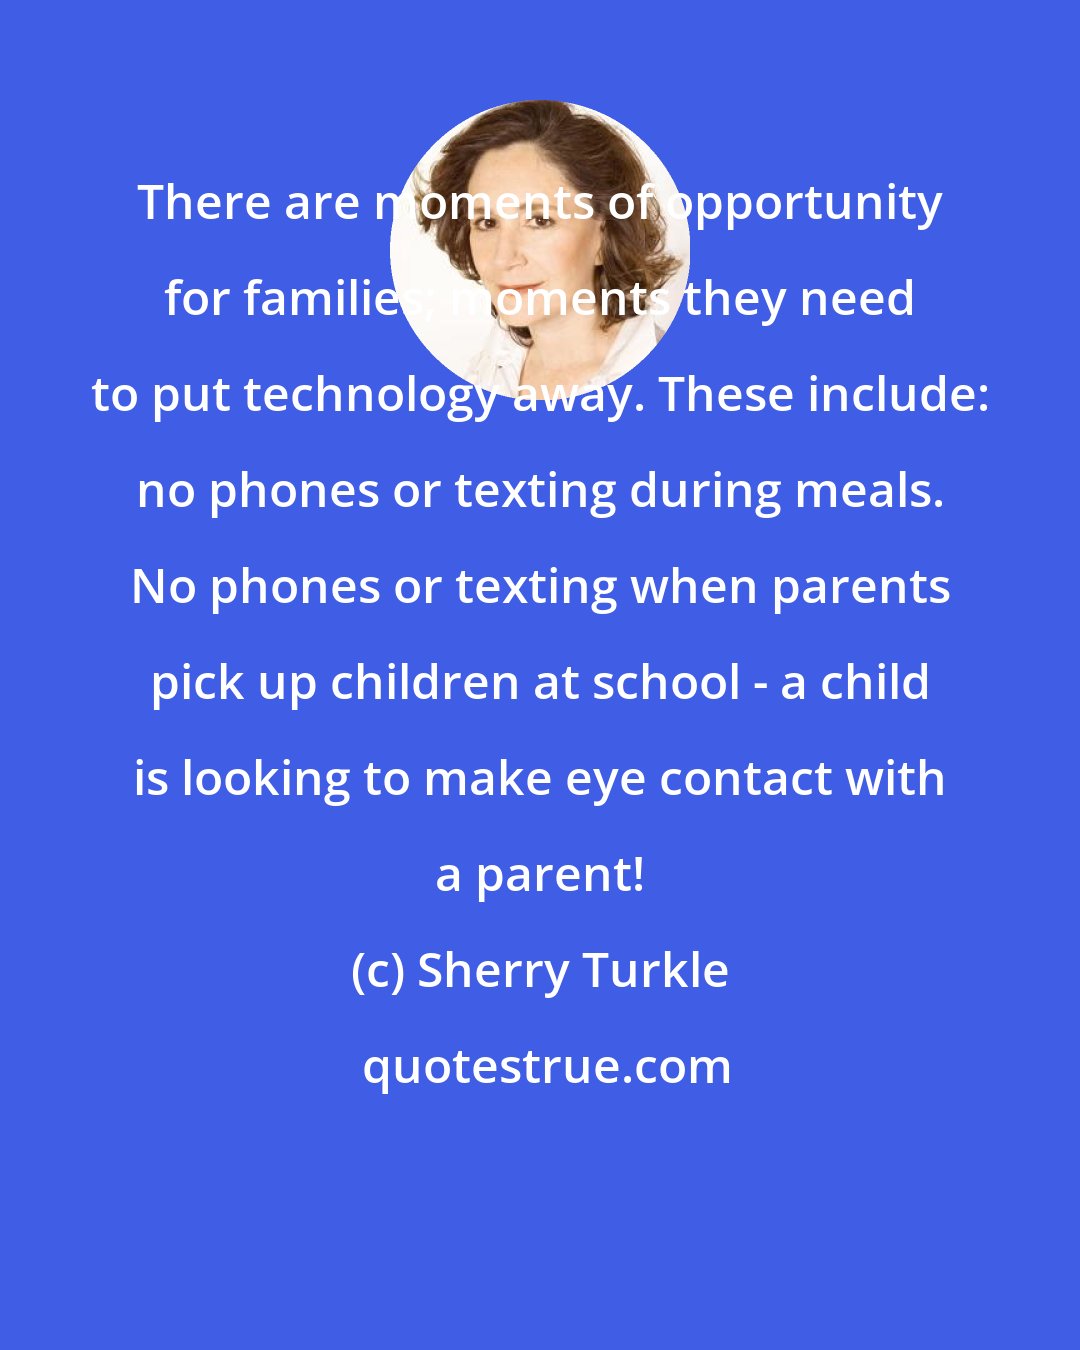 Sherry Turkle: There are moments of opportunity for families; moments they need to put technology away. These include: no phones or texting during meals. No phones or texting when parents pick up children at school - a child is looking to make eye contact with a parent!